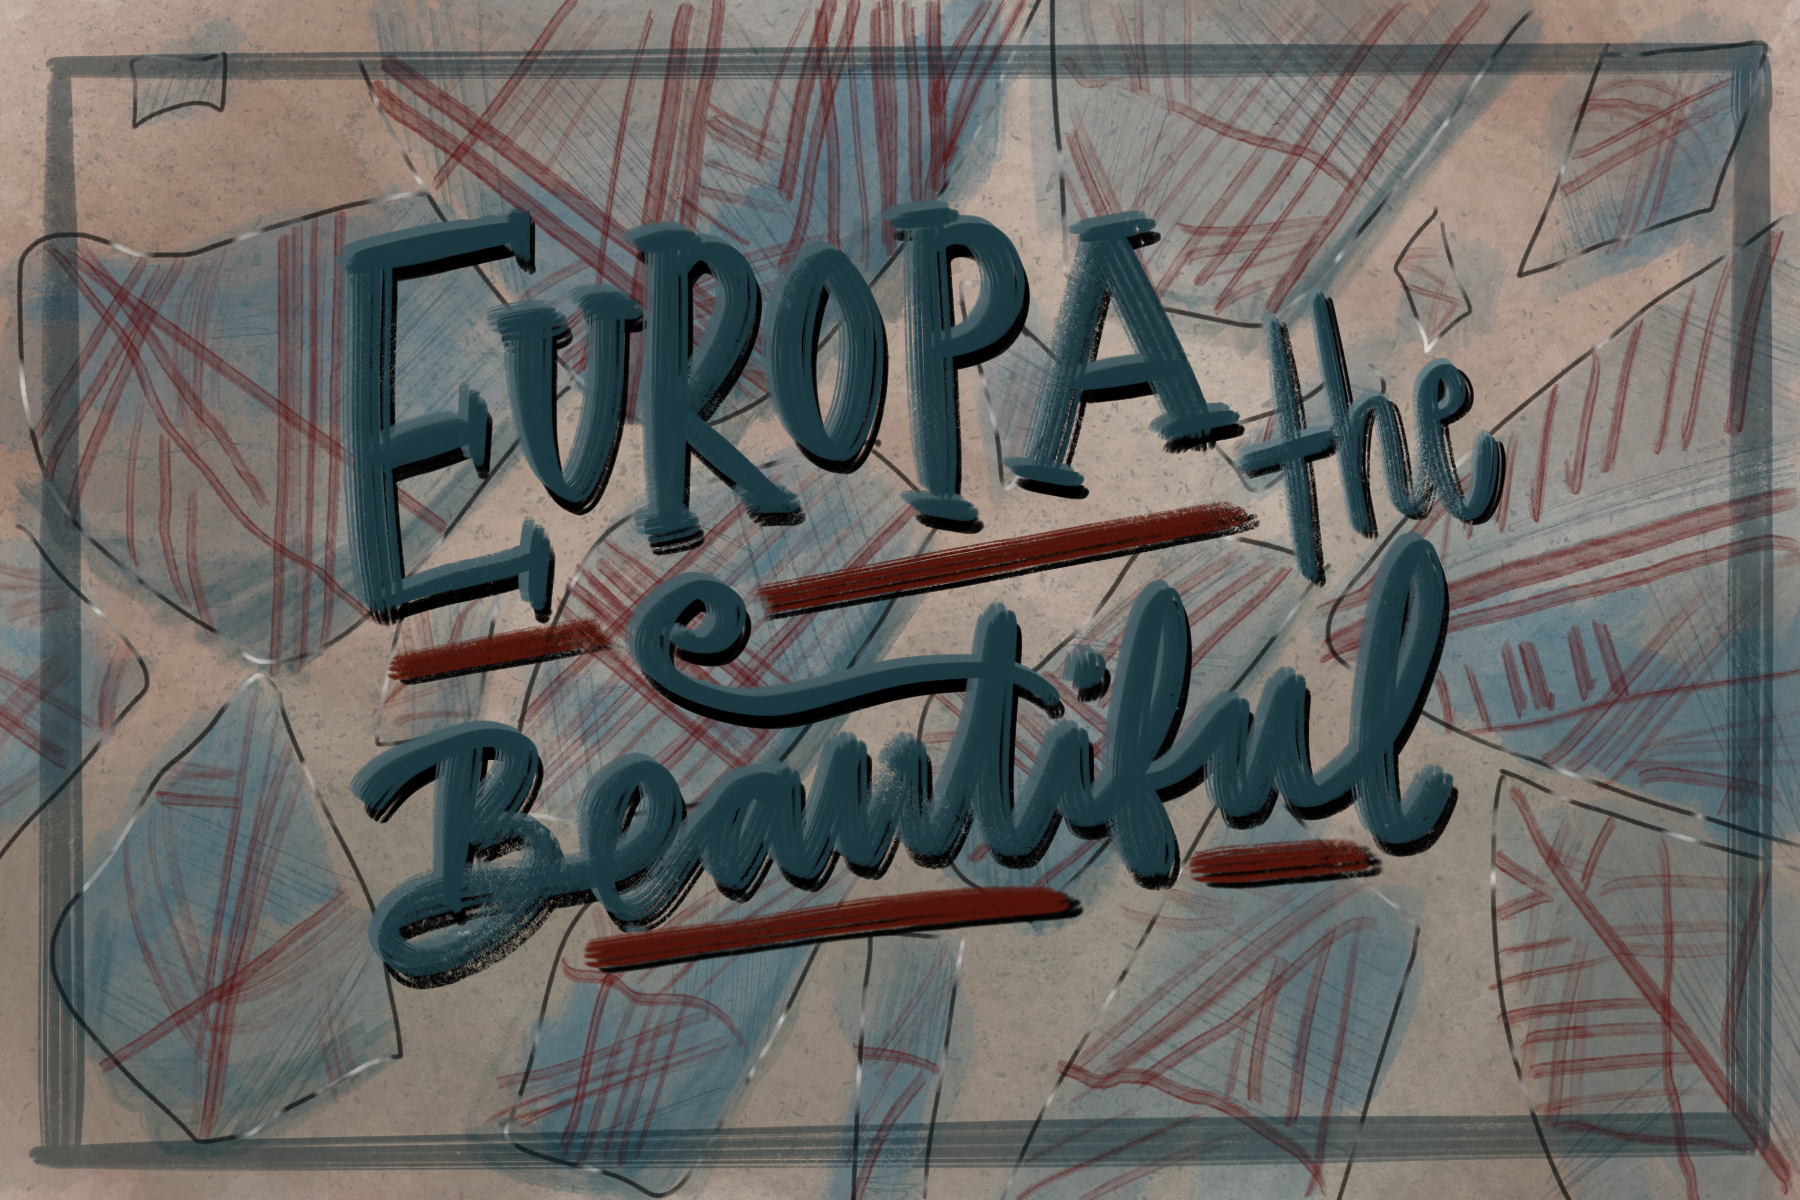 (Front) Fragments of all different shapes fill the grey-white background, like a mosaic. Each fragment is a shade of blue with red lines drawn across them in random patterns. The words "Europa the Beautiful" are written in big, bold, cursive, dark blue letters, underlined in thick red, and placed in the very center of the image.